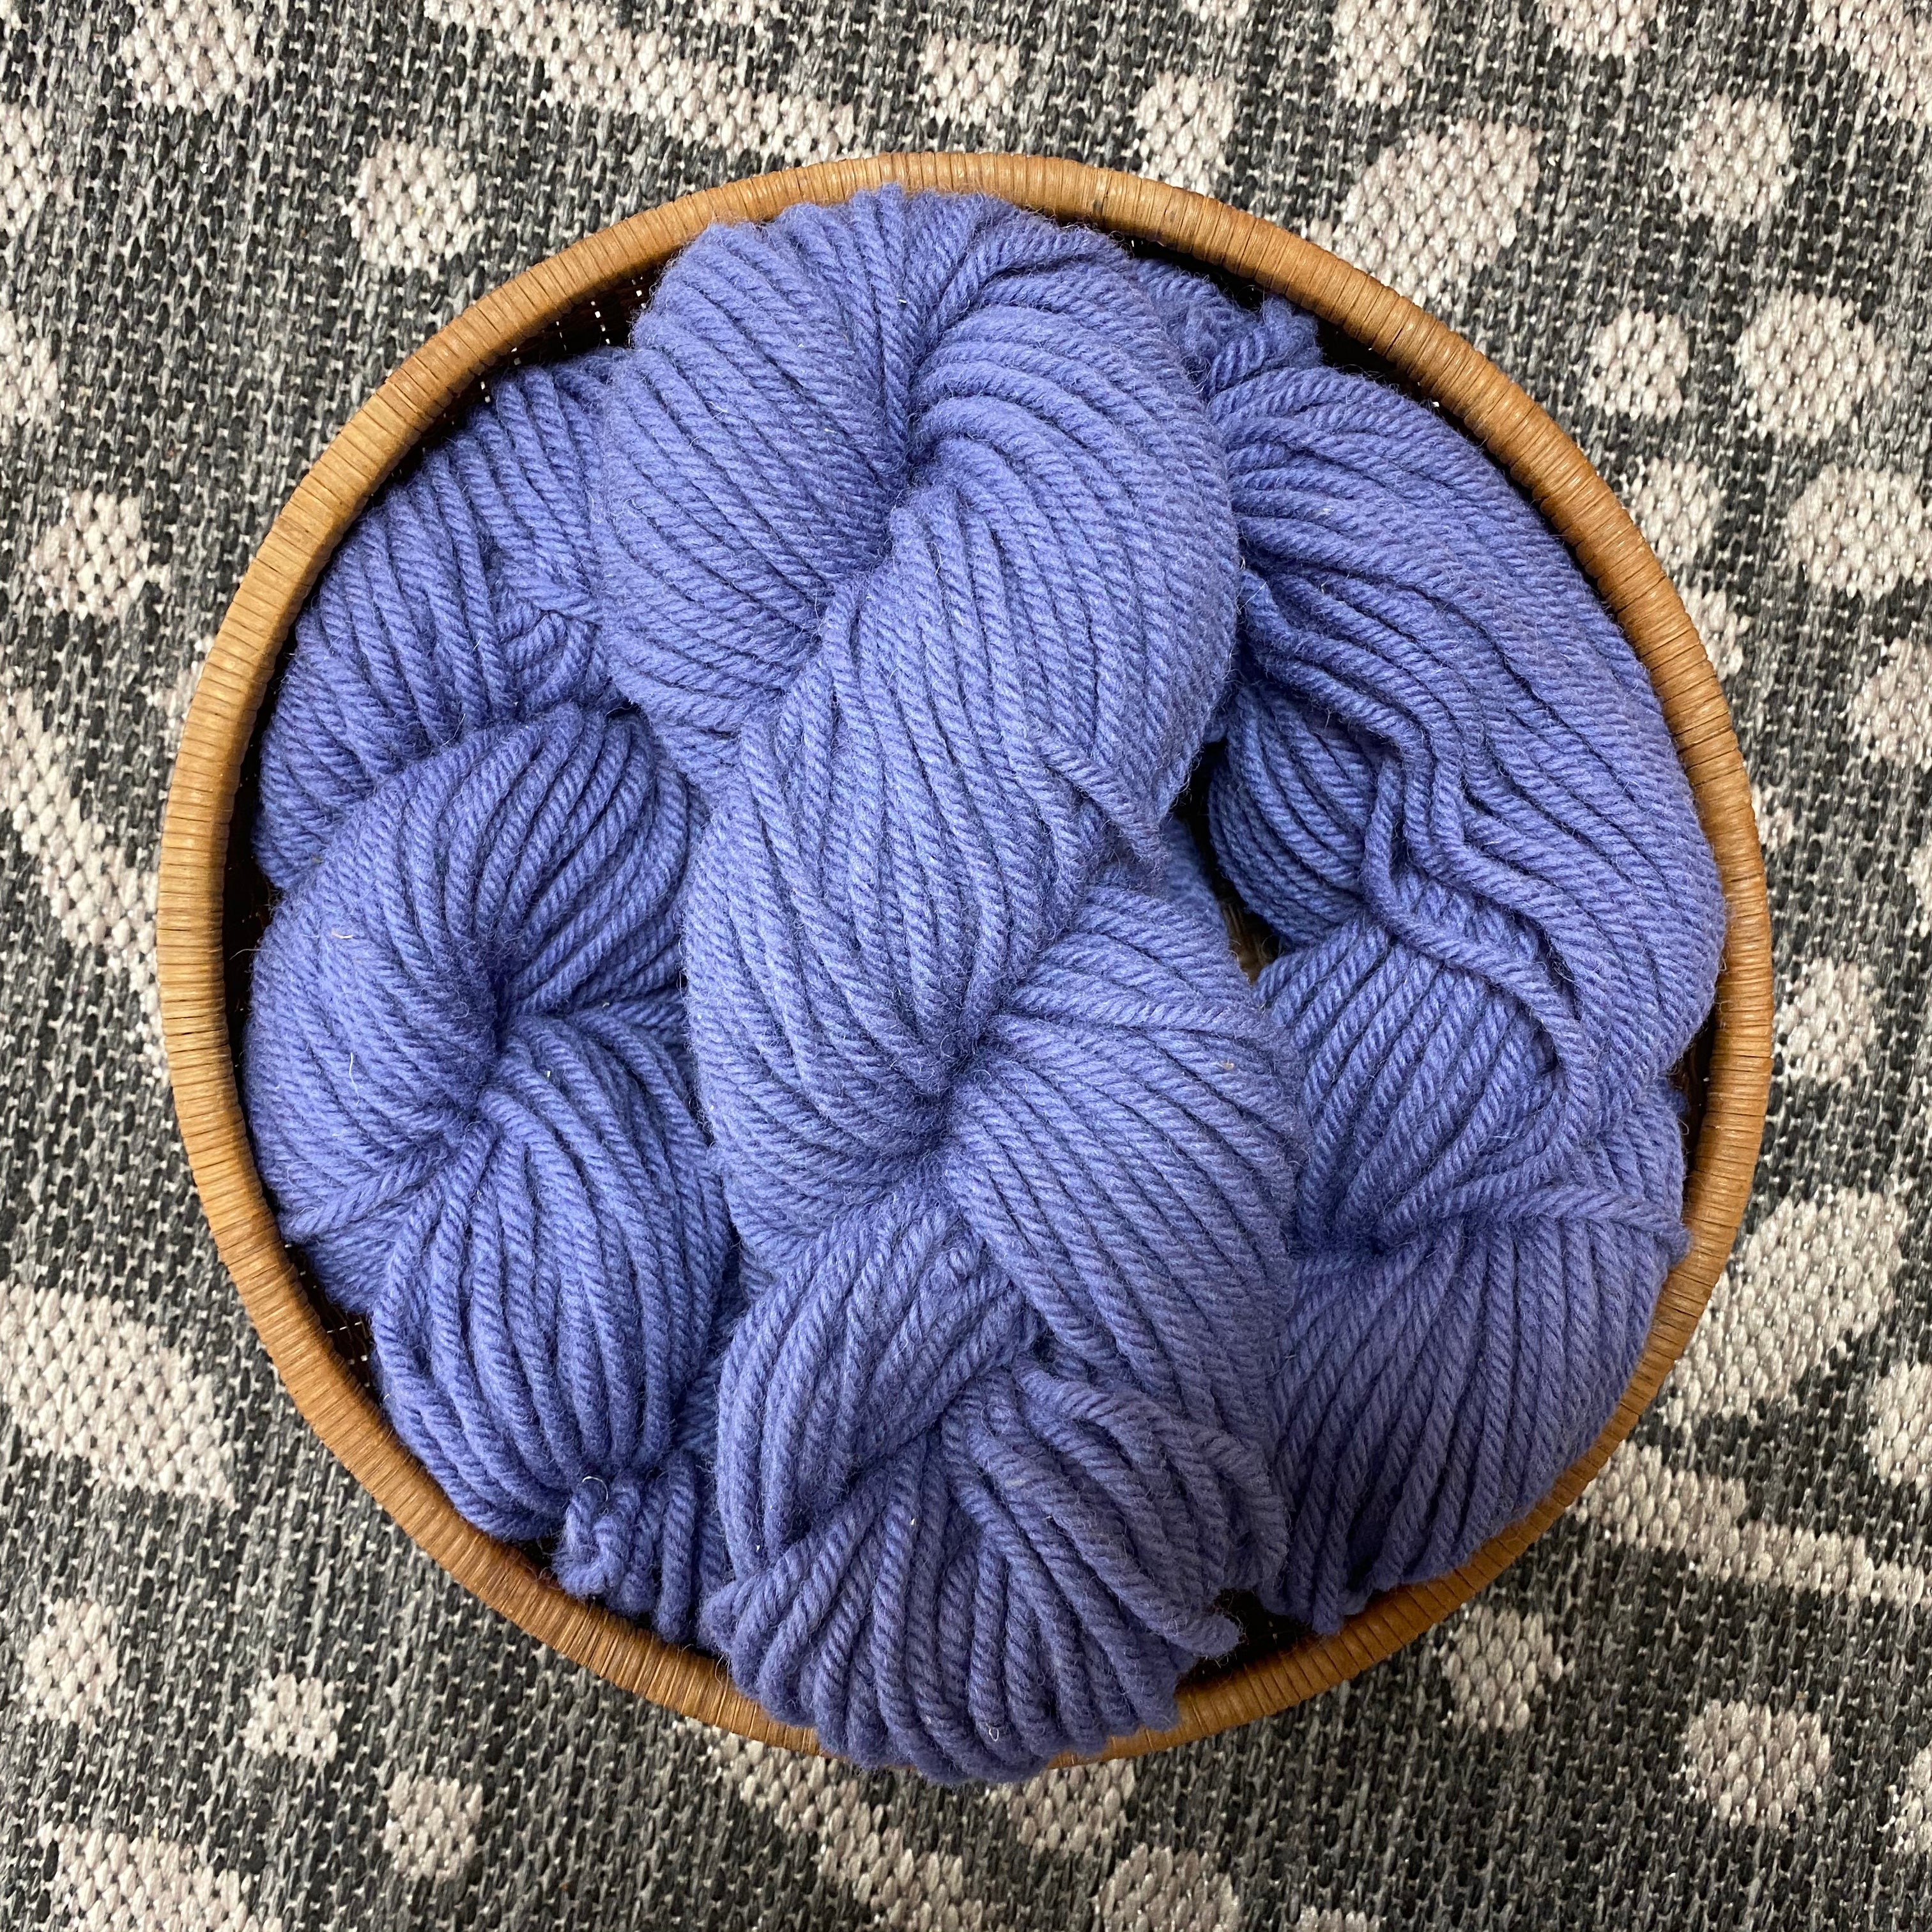 Briggs and Little 100% Wool Yarn - Super 4-Ply for Rug Hooking, Oxford Punch Needle, and Latch Hook